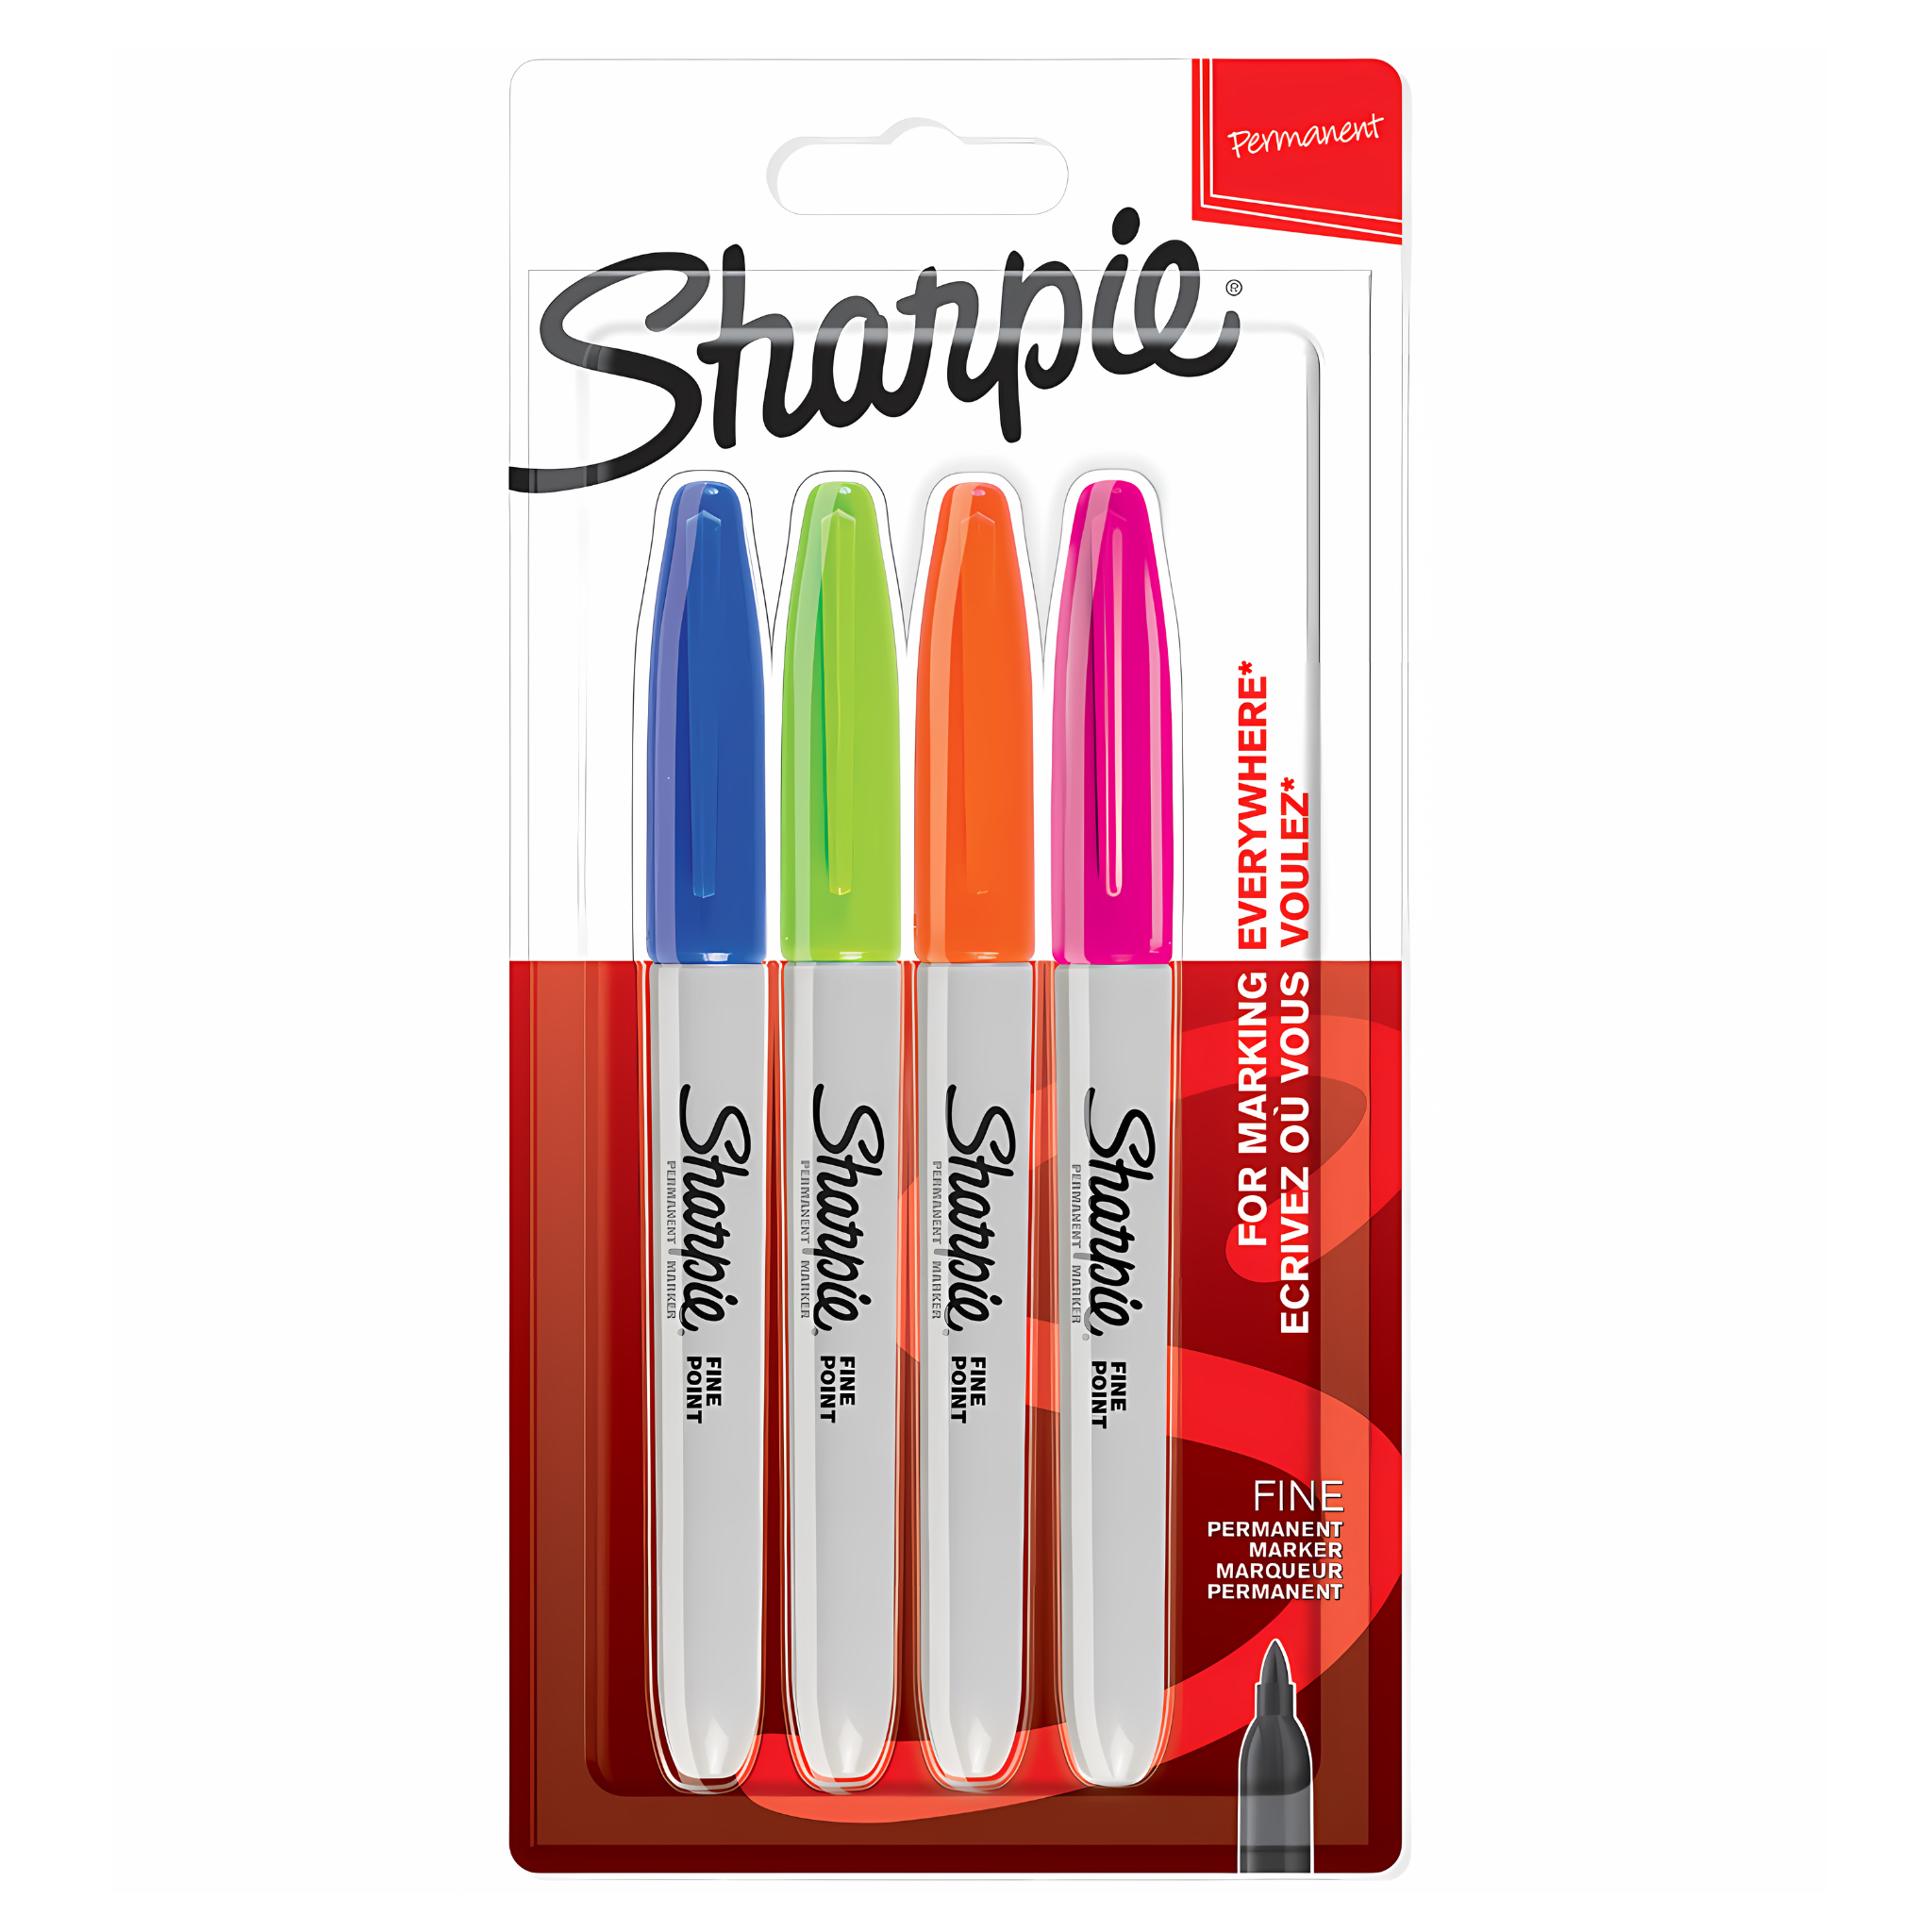 Sharpie Fun Colour Marker Pack of 4